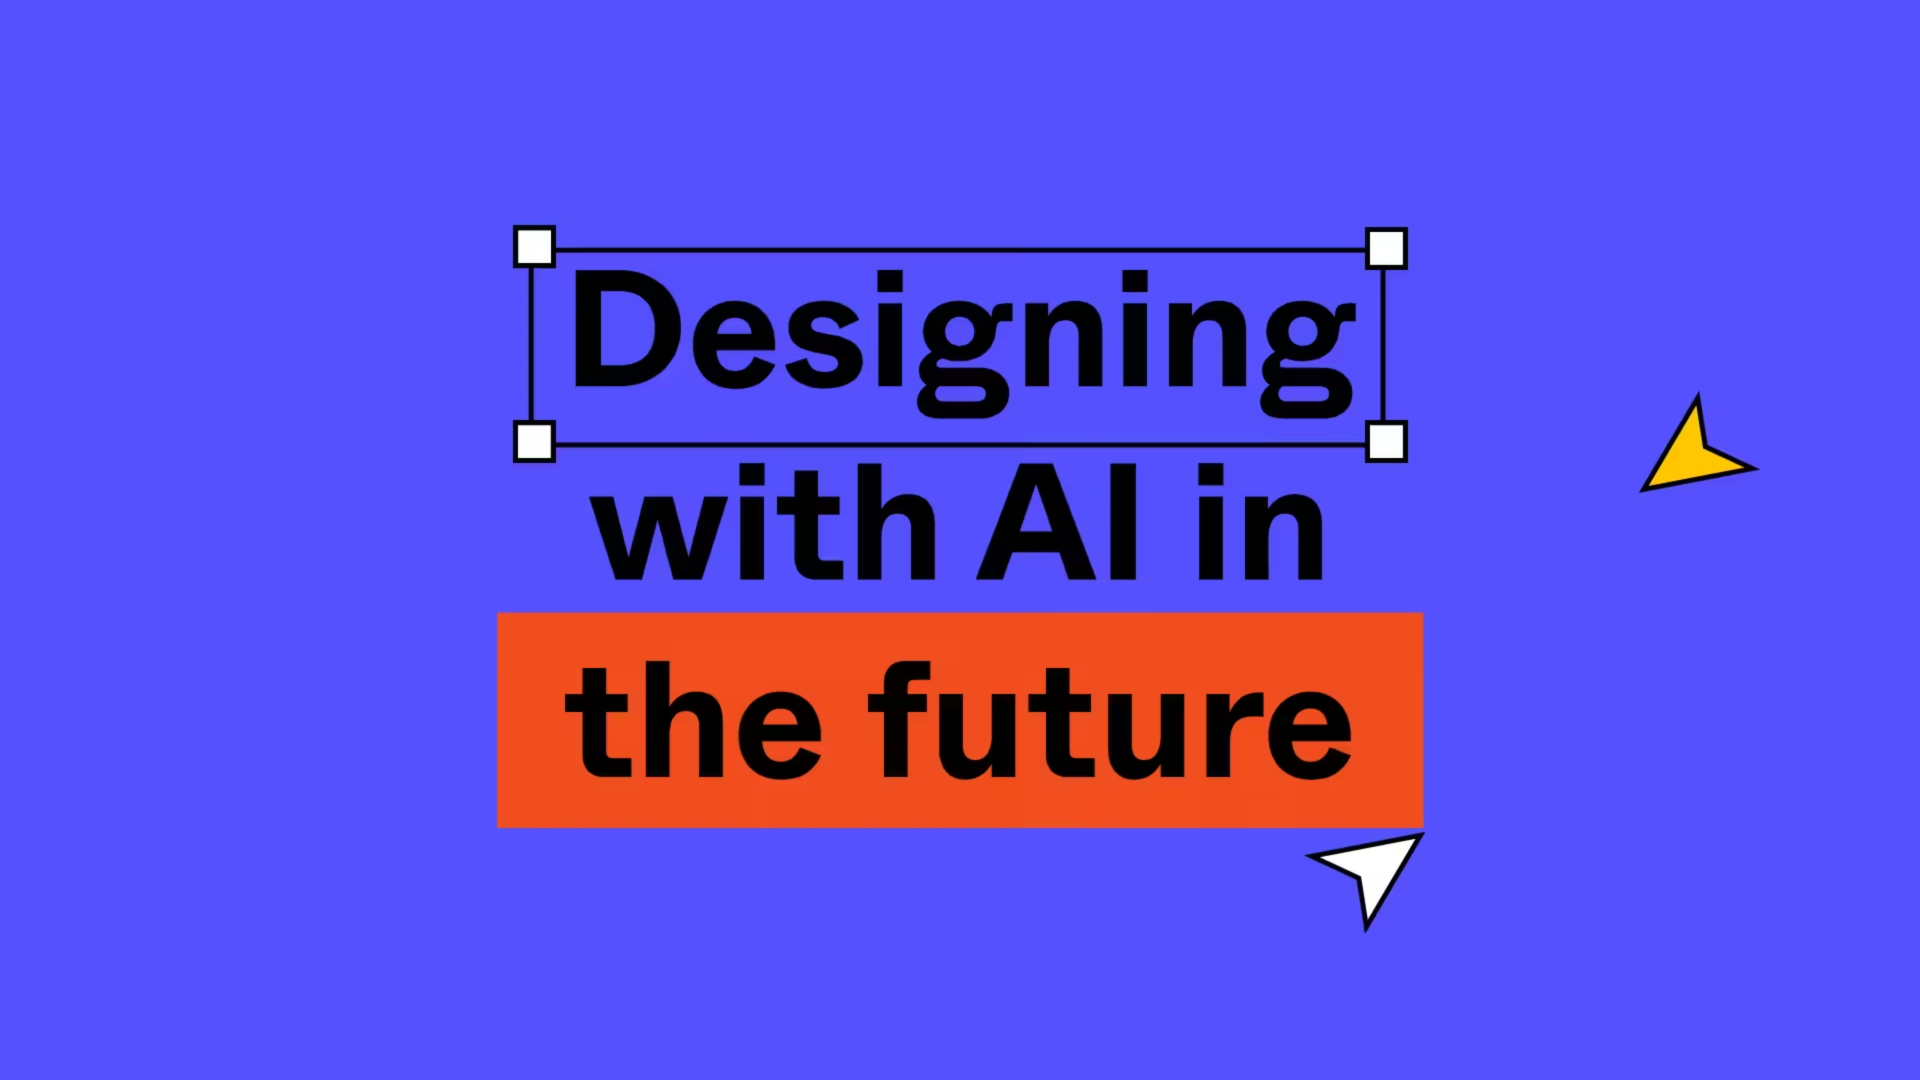 Titlecard reads: Designing with AI in the future